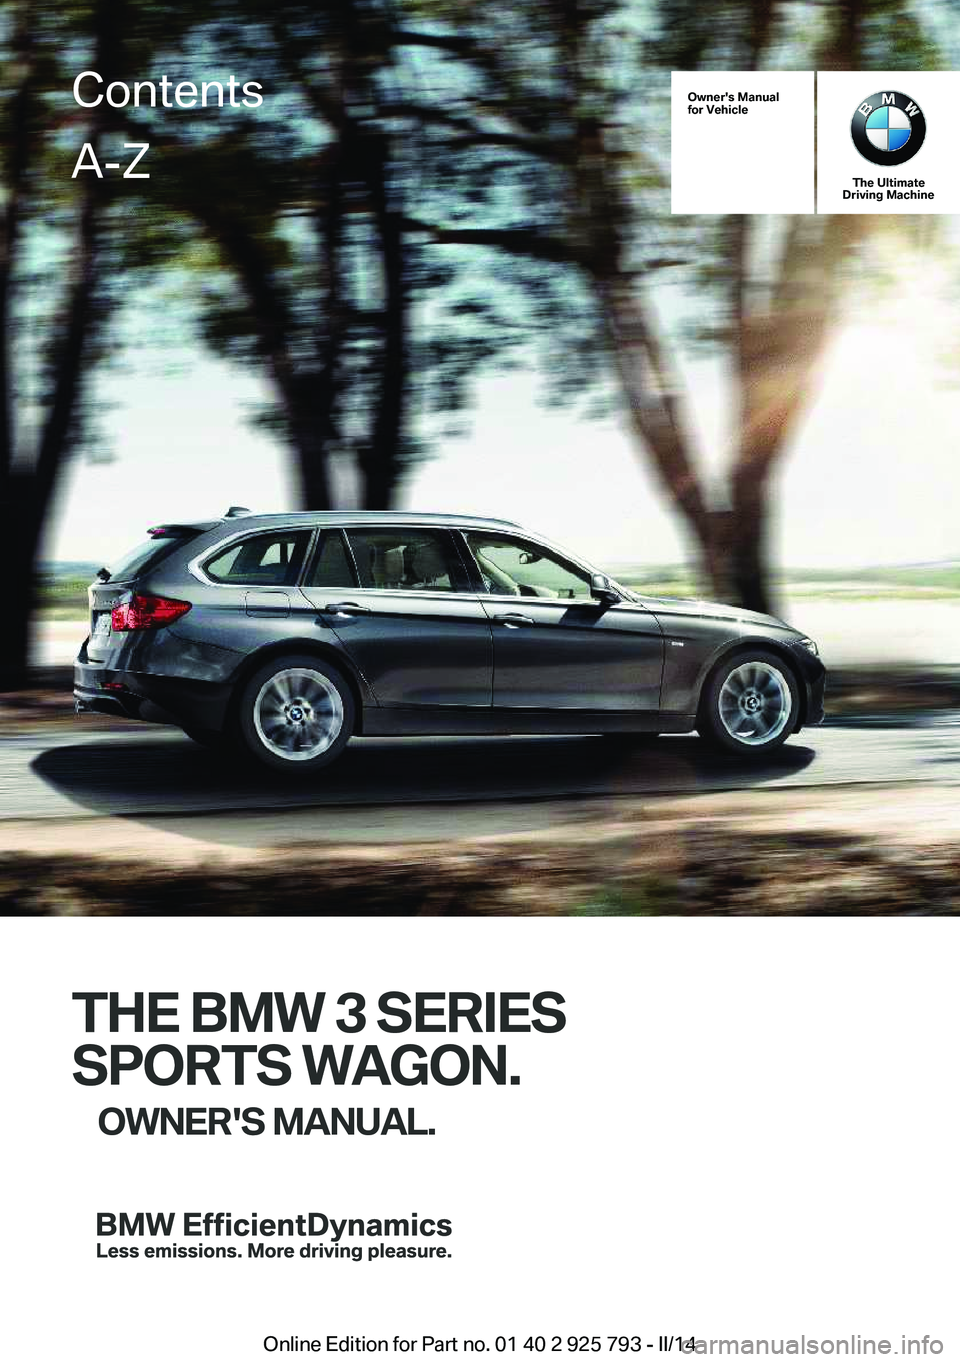 BMW 328I XDRIVE SPORTS WAGON 2014  Owners Manual Owner's Manual
for Vehicle
The Ultimate
Driving Machine
THE BMW 3 SERIES
SPORTS WAGON. OWNER'S MANUAL.
ContentsA-Z
Online Edition for Part no. 01 40 2 925 793 - II/14   